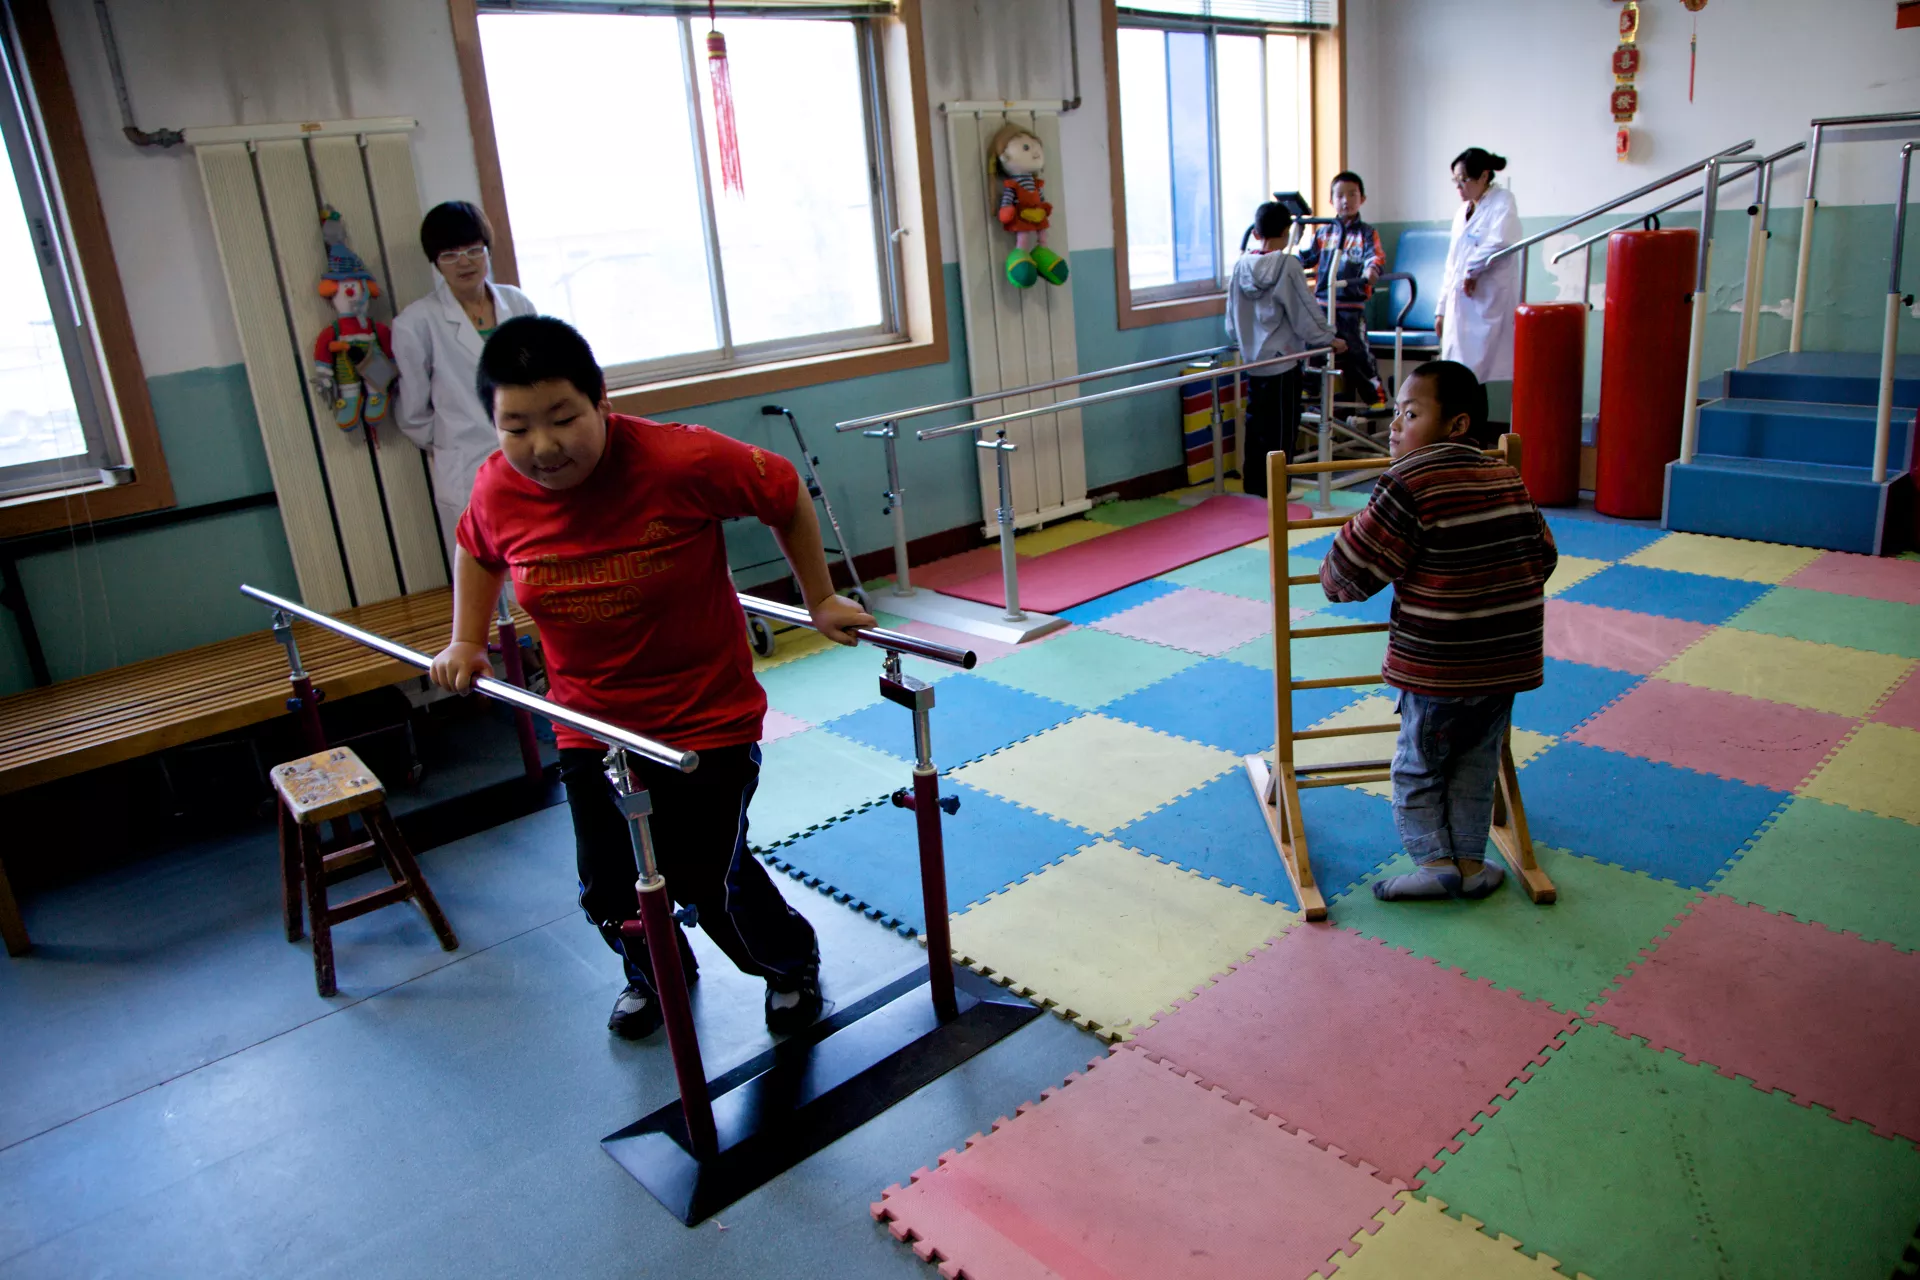 Children with disabilities receive rehabilitation service provided by professionals in Lanzhou Child Welfare Institute.